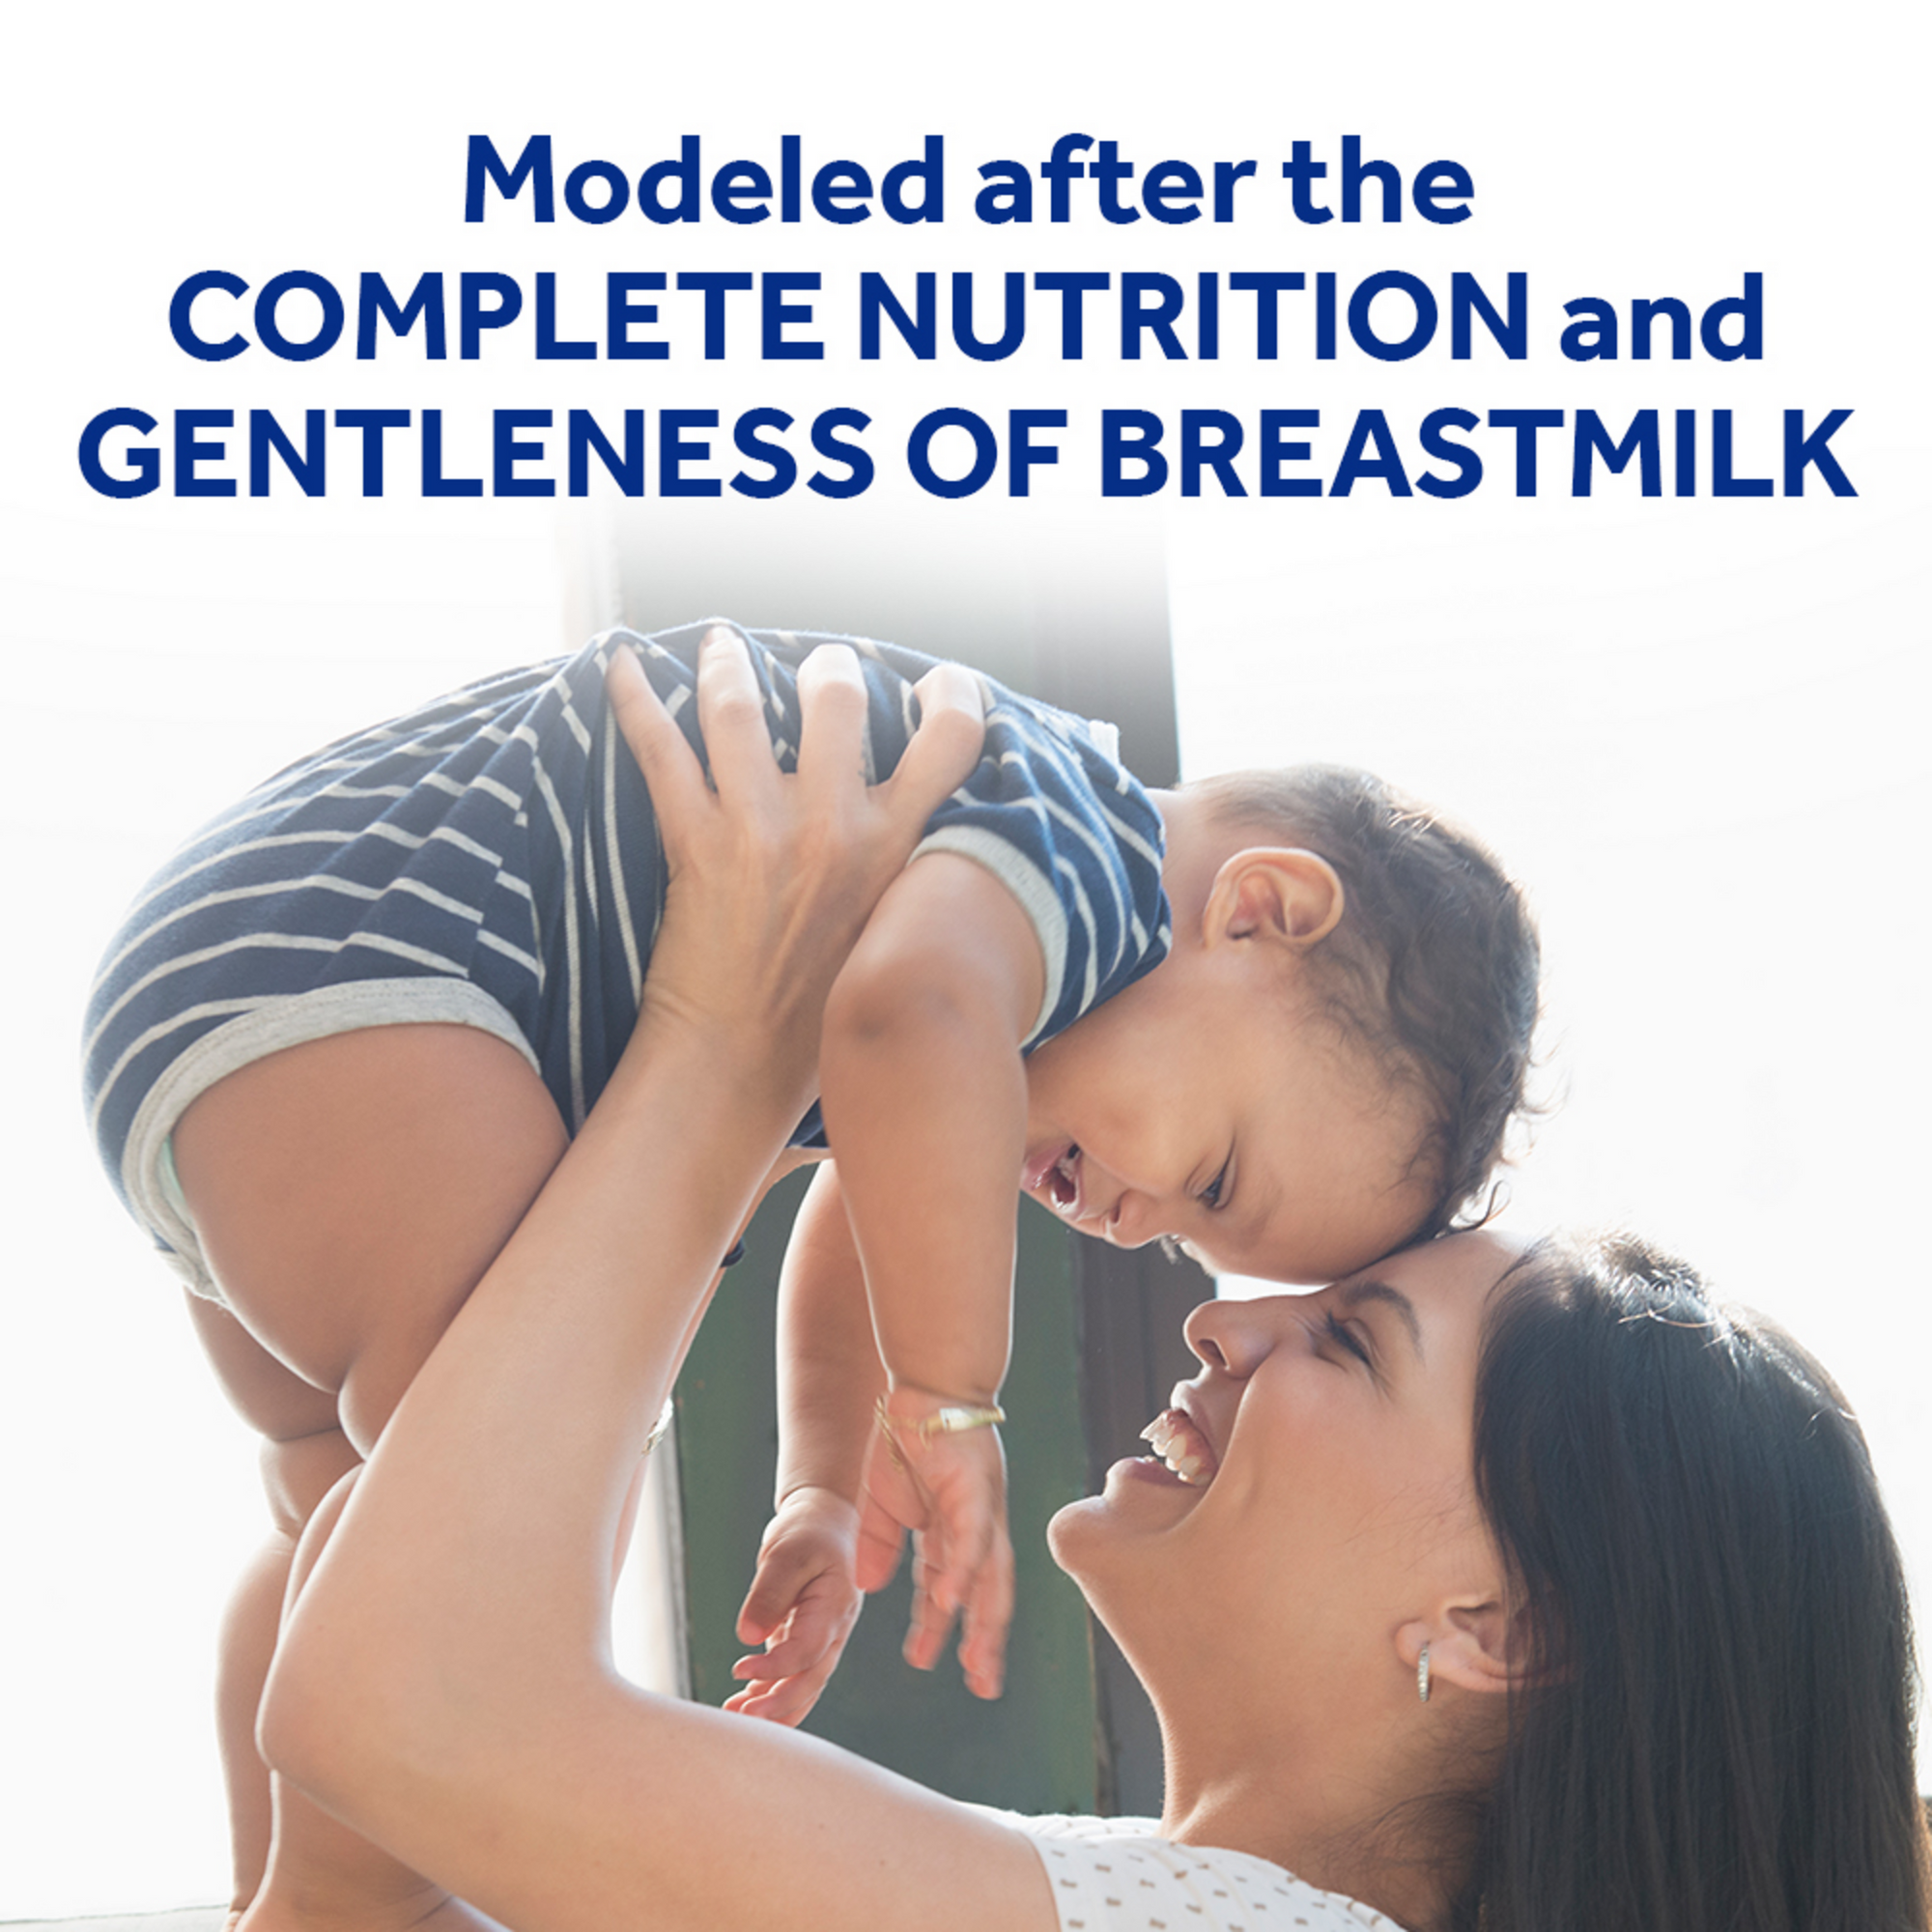 Mom holding a child. Modeled after the Complete Nutrition and Gentleness of breastmilk